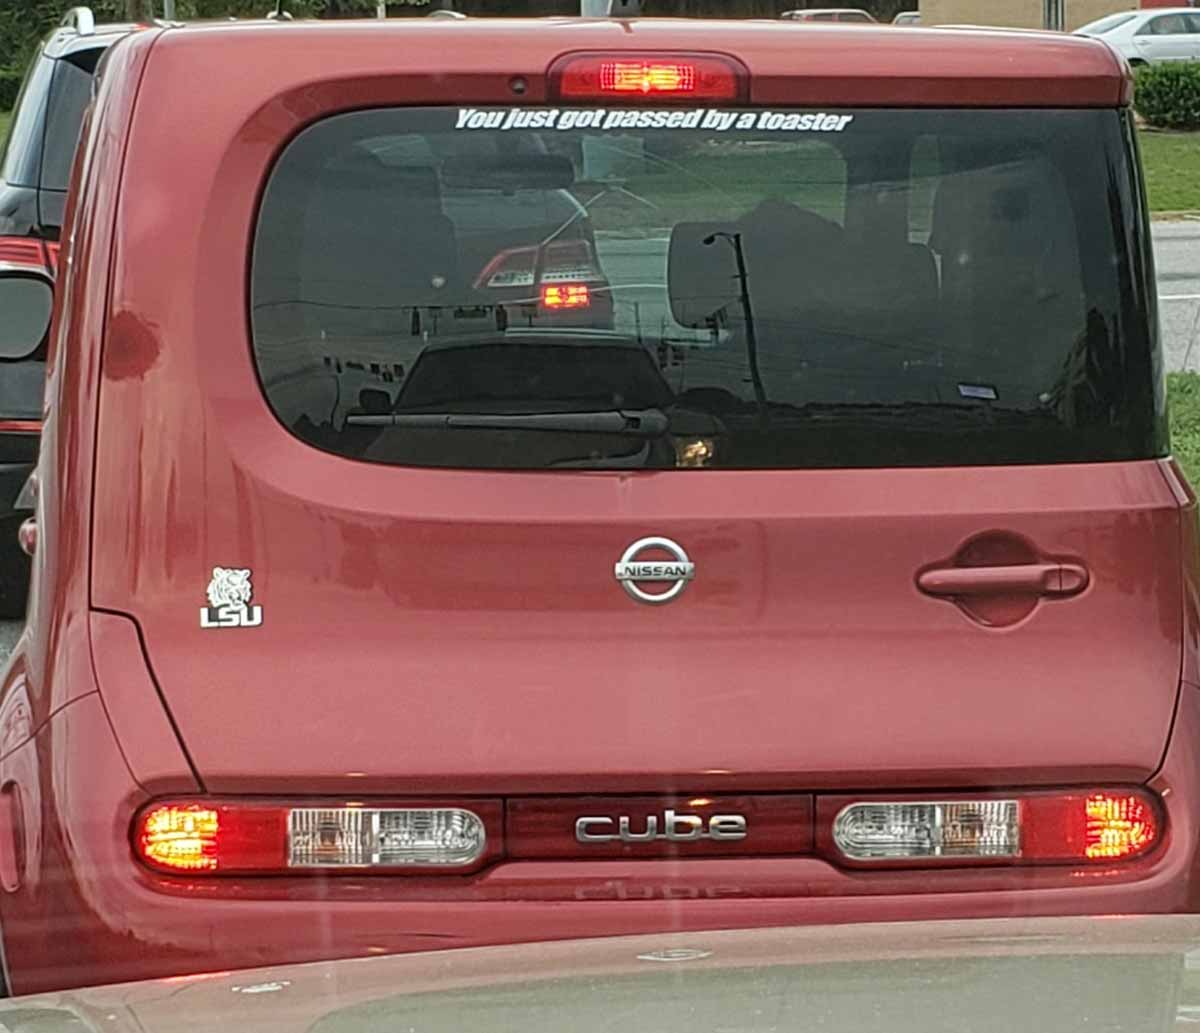 Funny sticker on the back of a Nissan Cube that says 'you just got passed by a toaster'